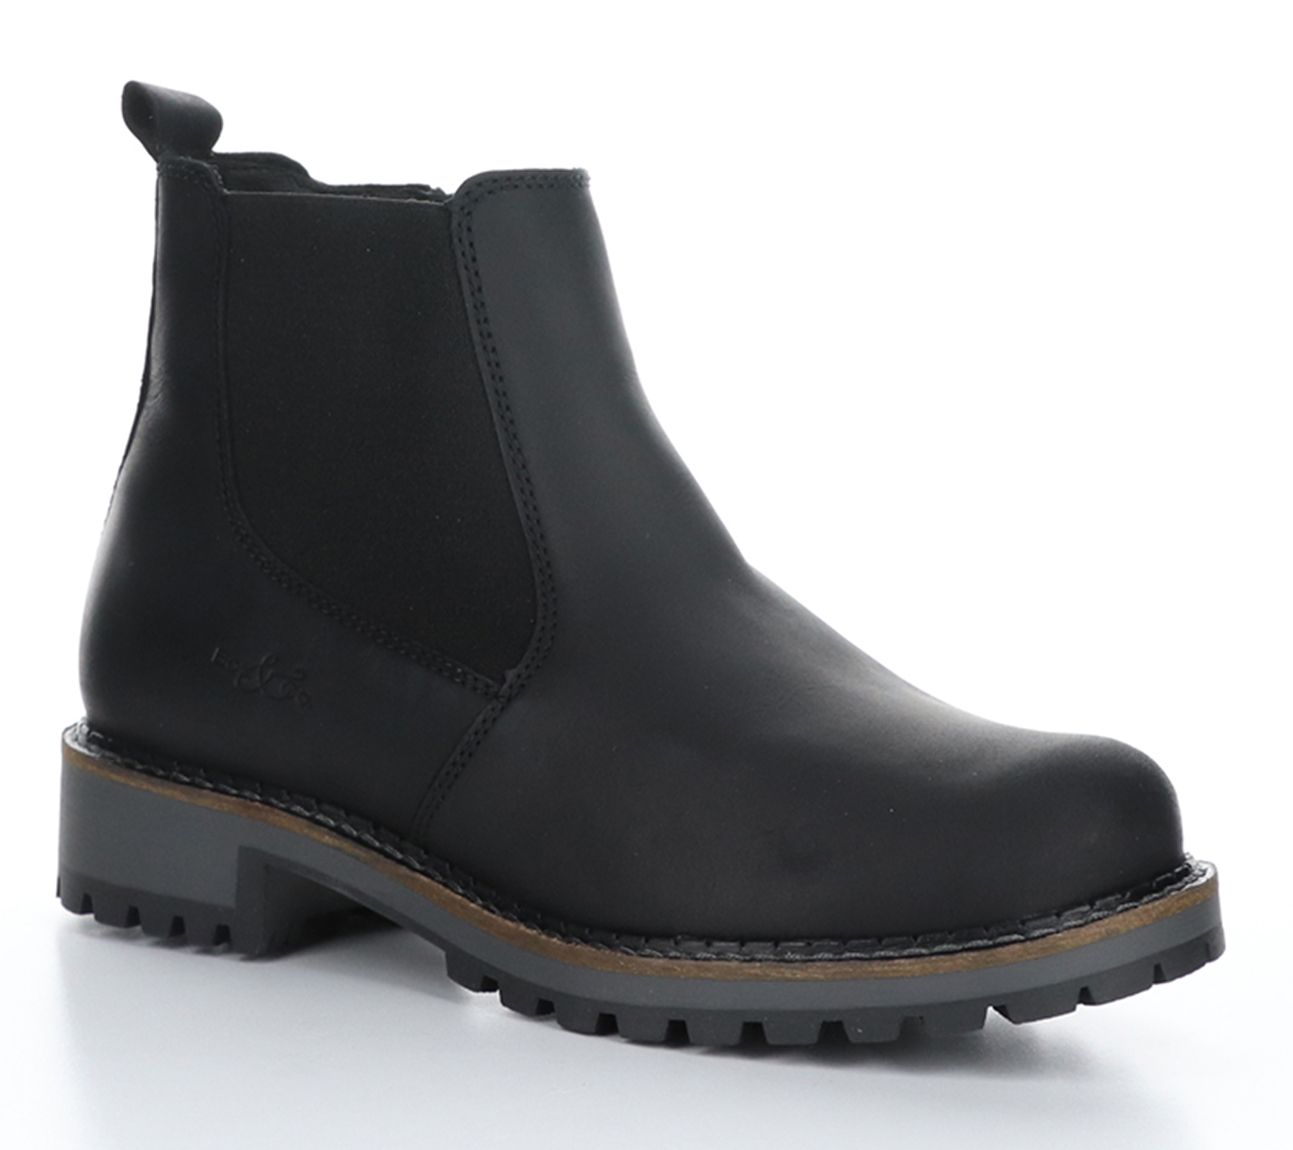 Bos. & Co. Winter Leather Side Zip Boots - Corr in - QVC.com